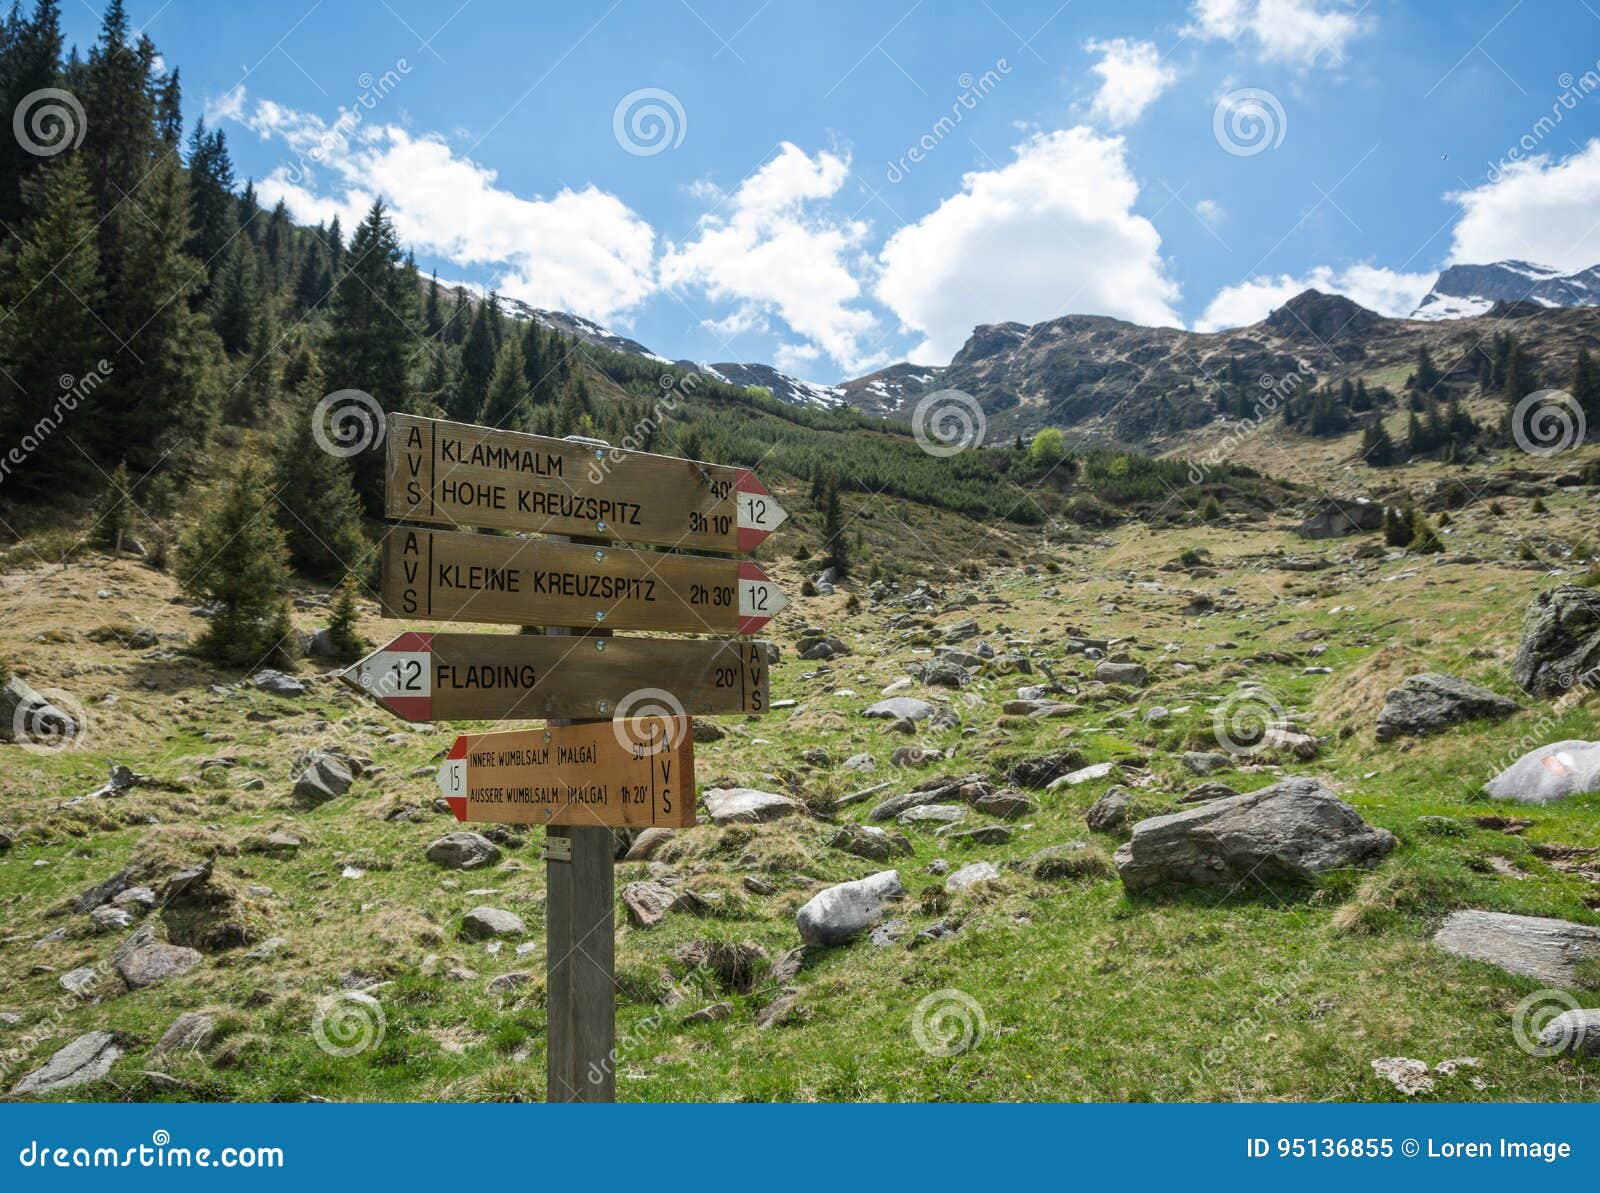 signpost in the mountain. racines valley